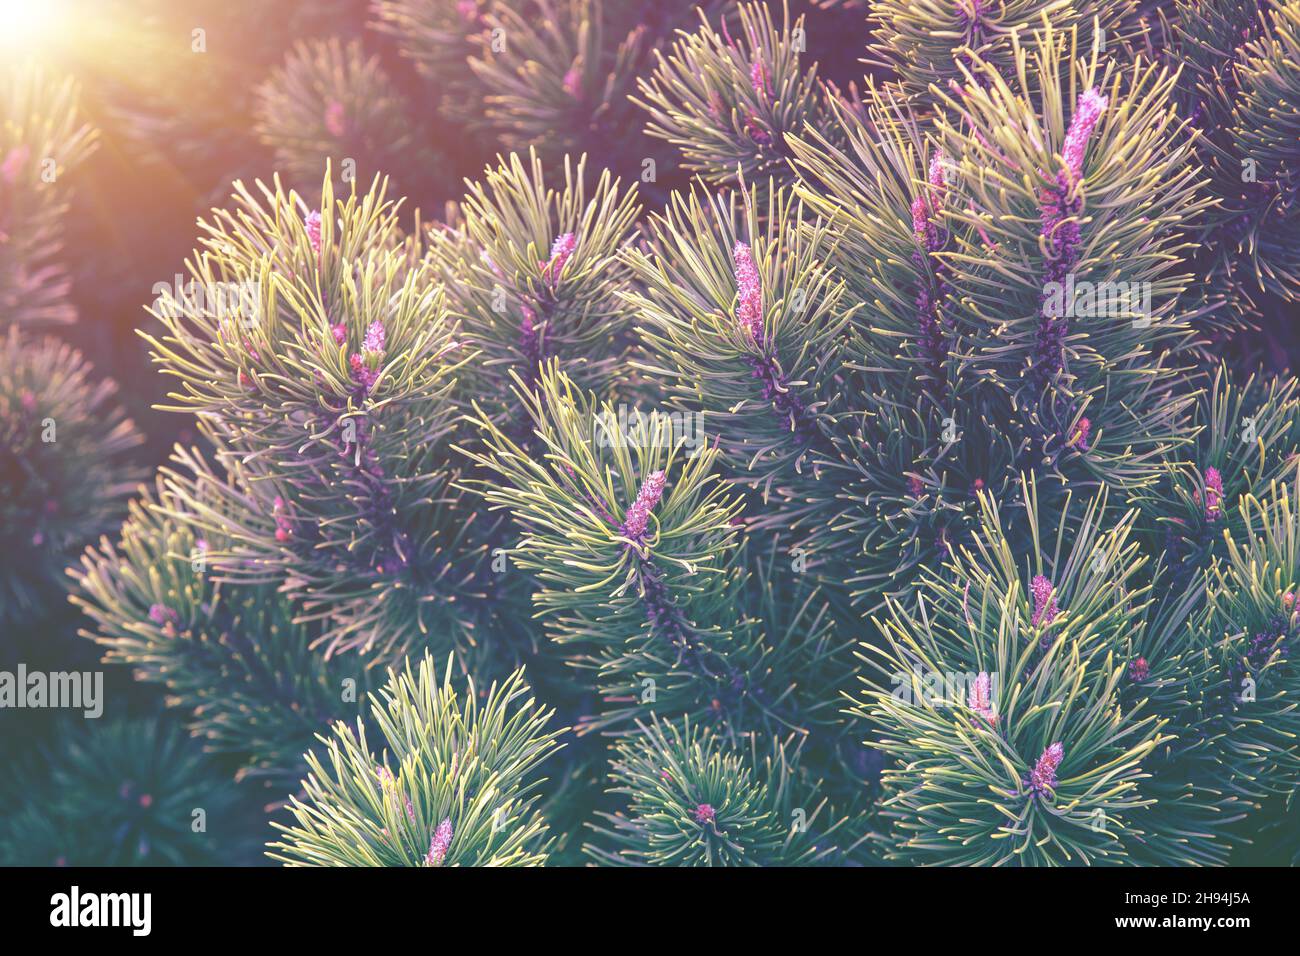 Young shoots and pine cones. Branches of a pine tree in spring Stock Photo